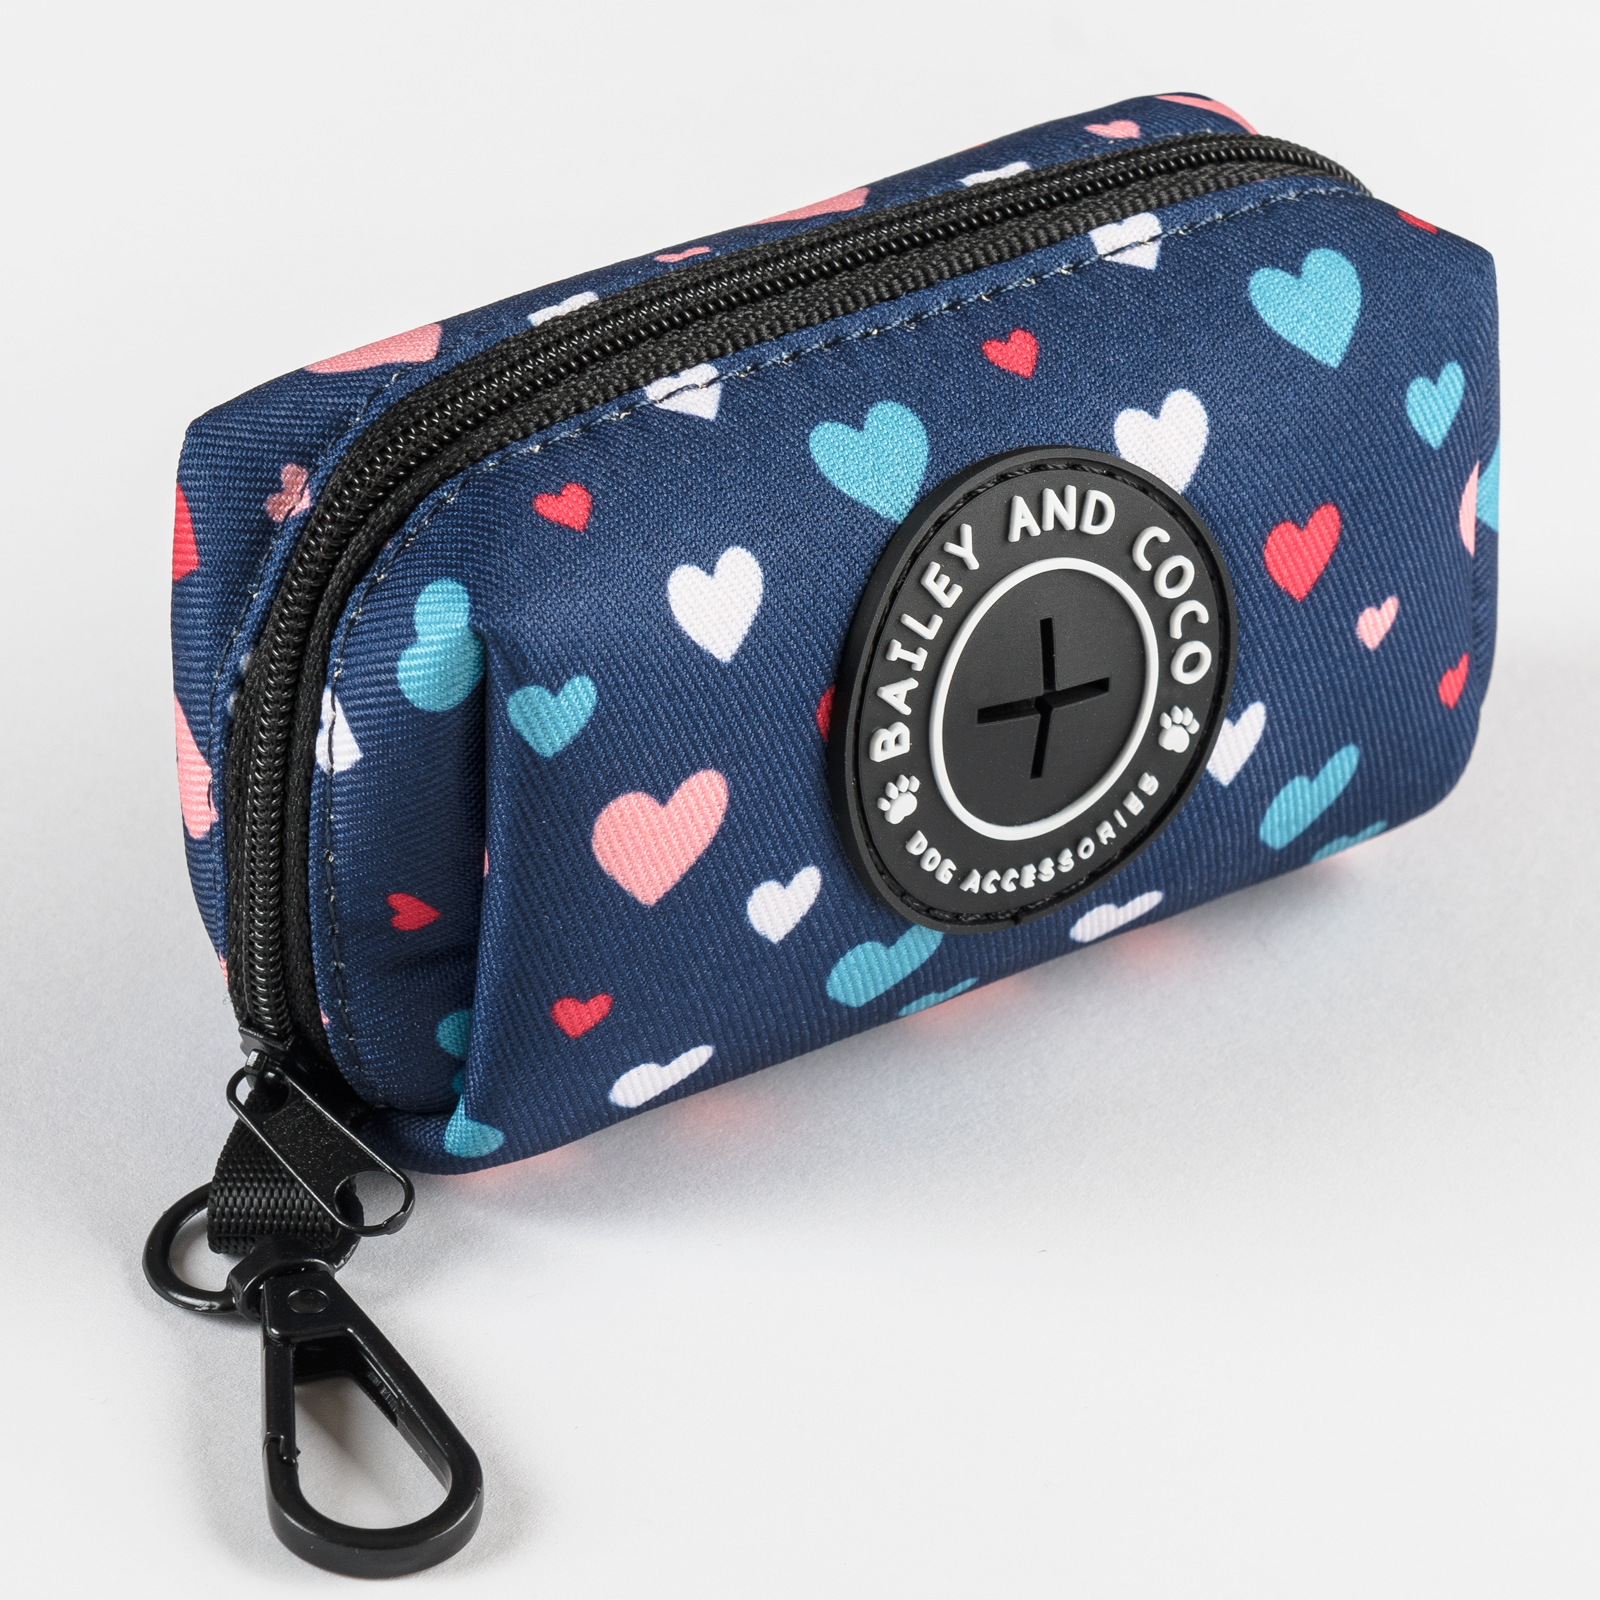 Poo Bag Holder - All You Need Is Love